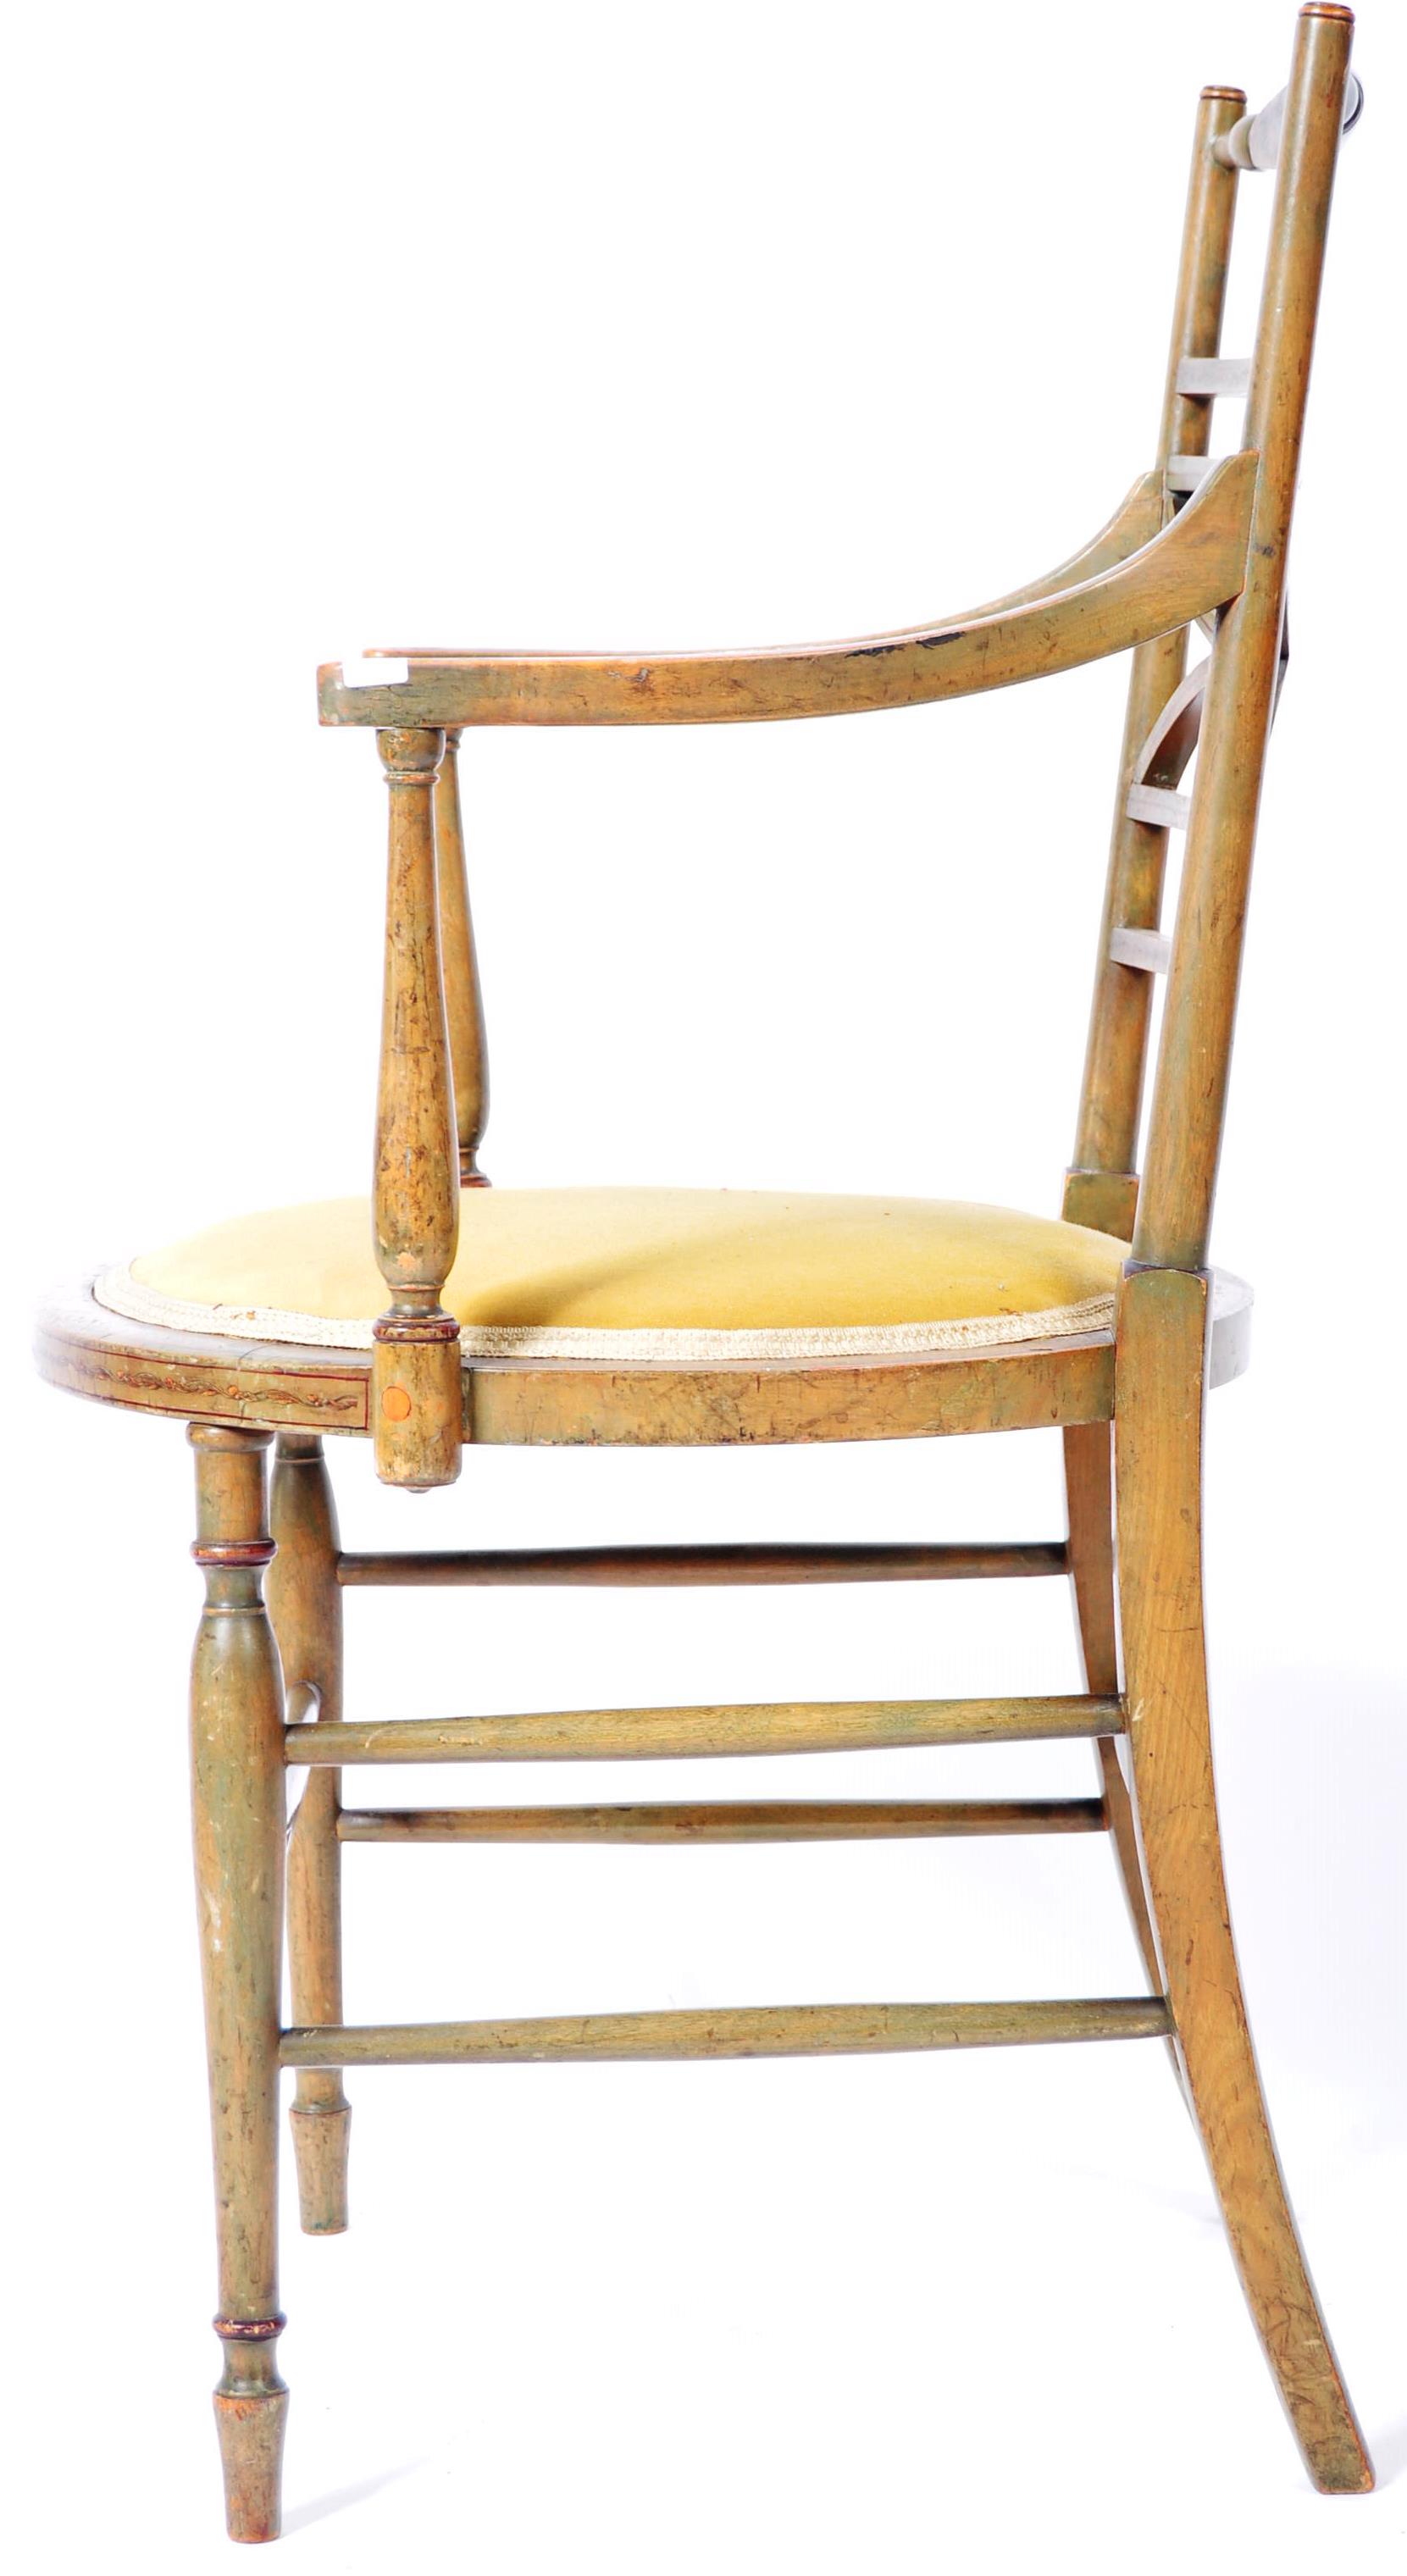 EARLY 19TH CENTURY GEORGIAN REGENCY PAINTED ARM CHAIR - Image 7 of 8